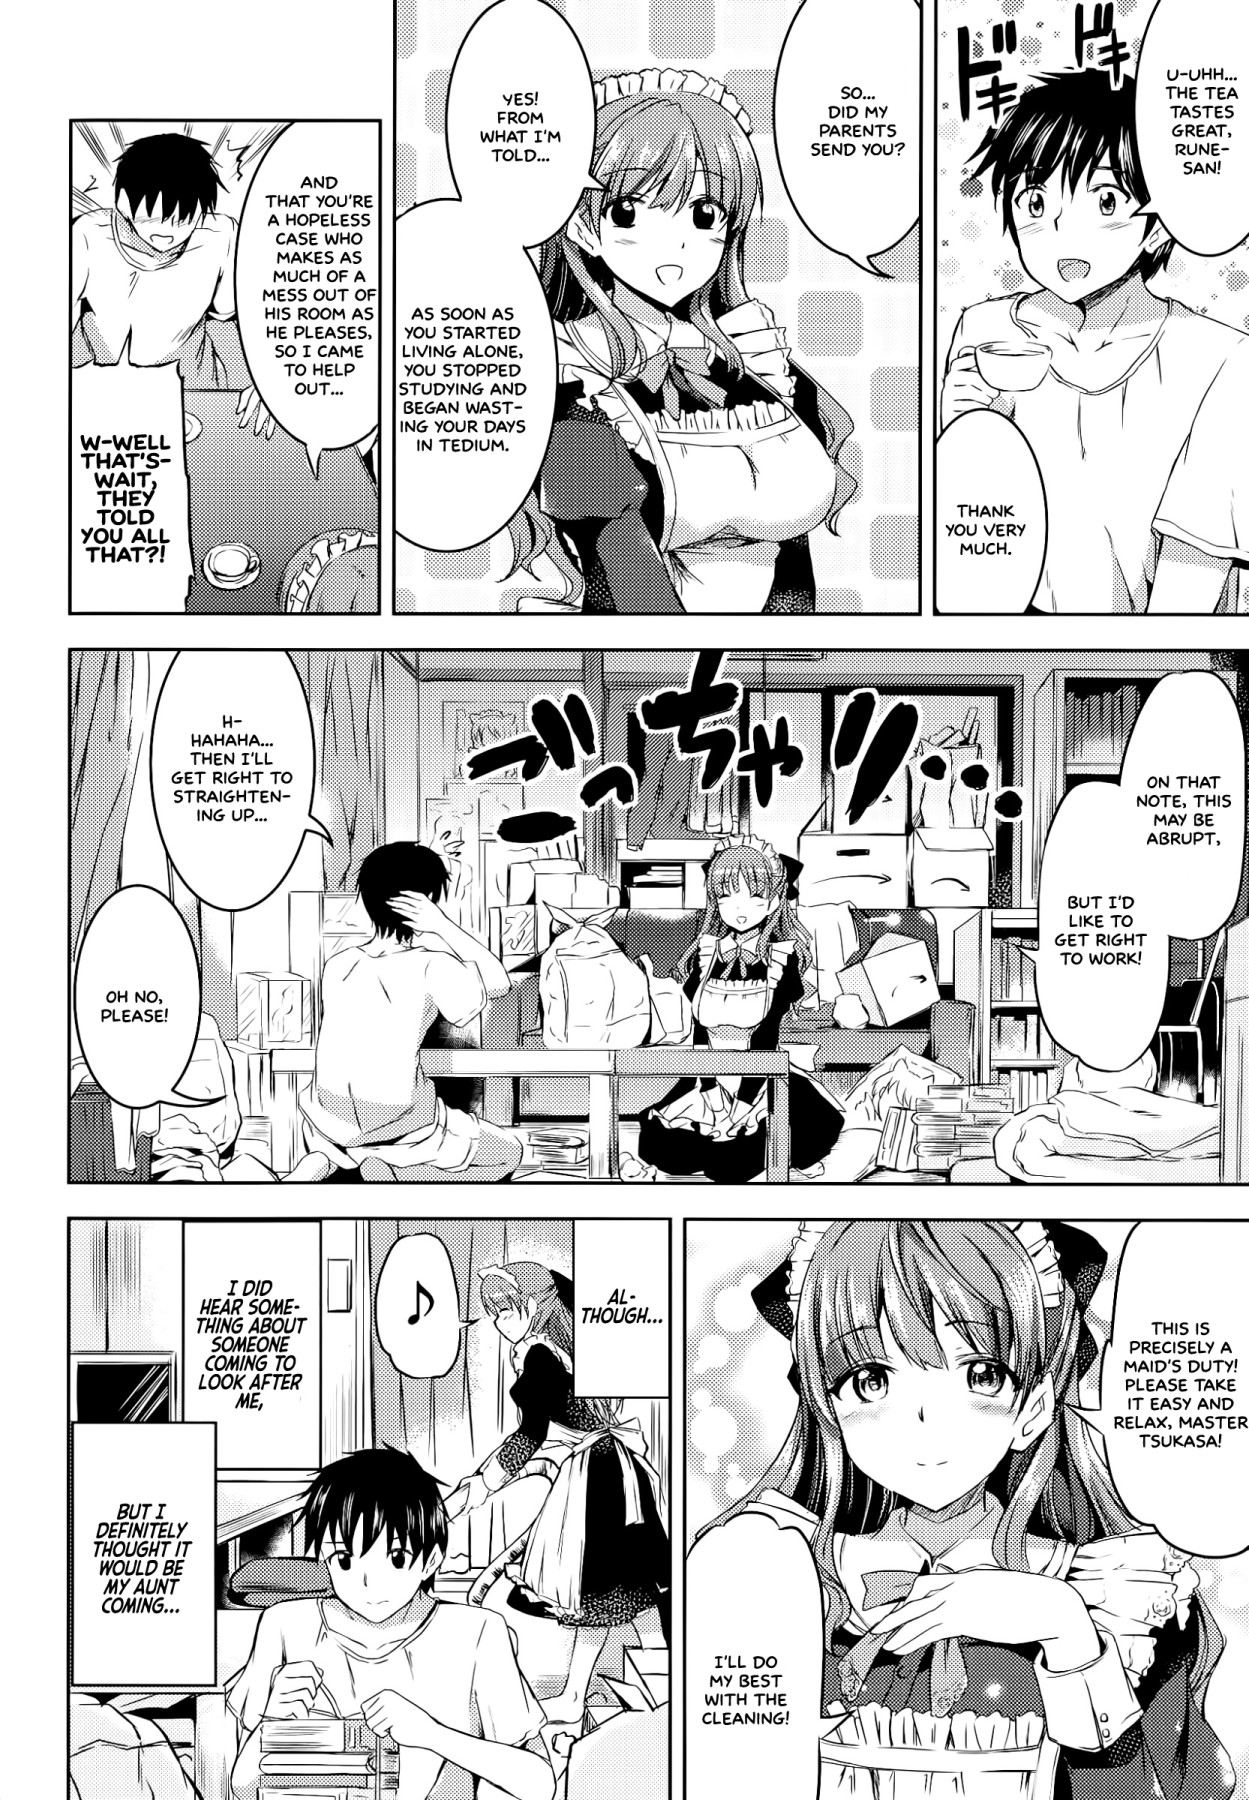 Hentai Manga Comic-The Young Lady's Maid Situation-Chapter 3-2